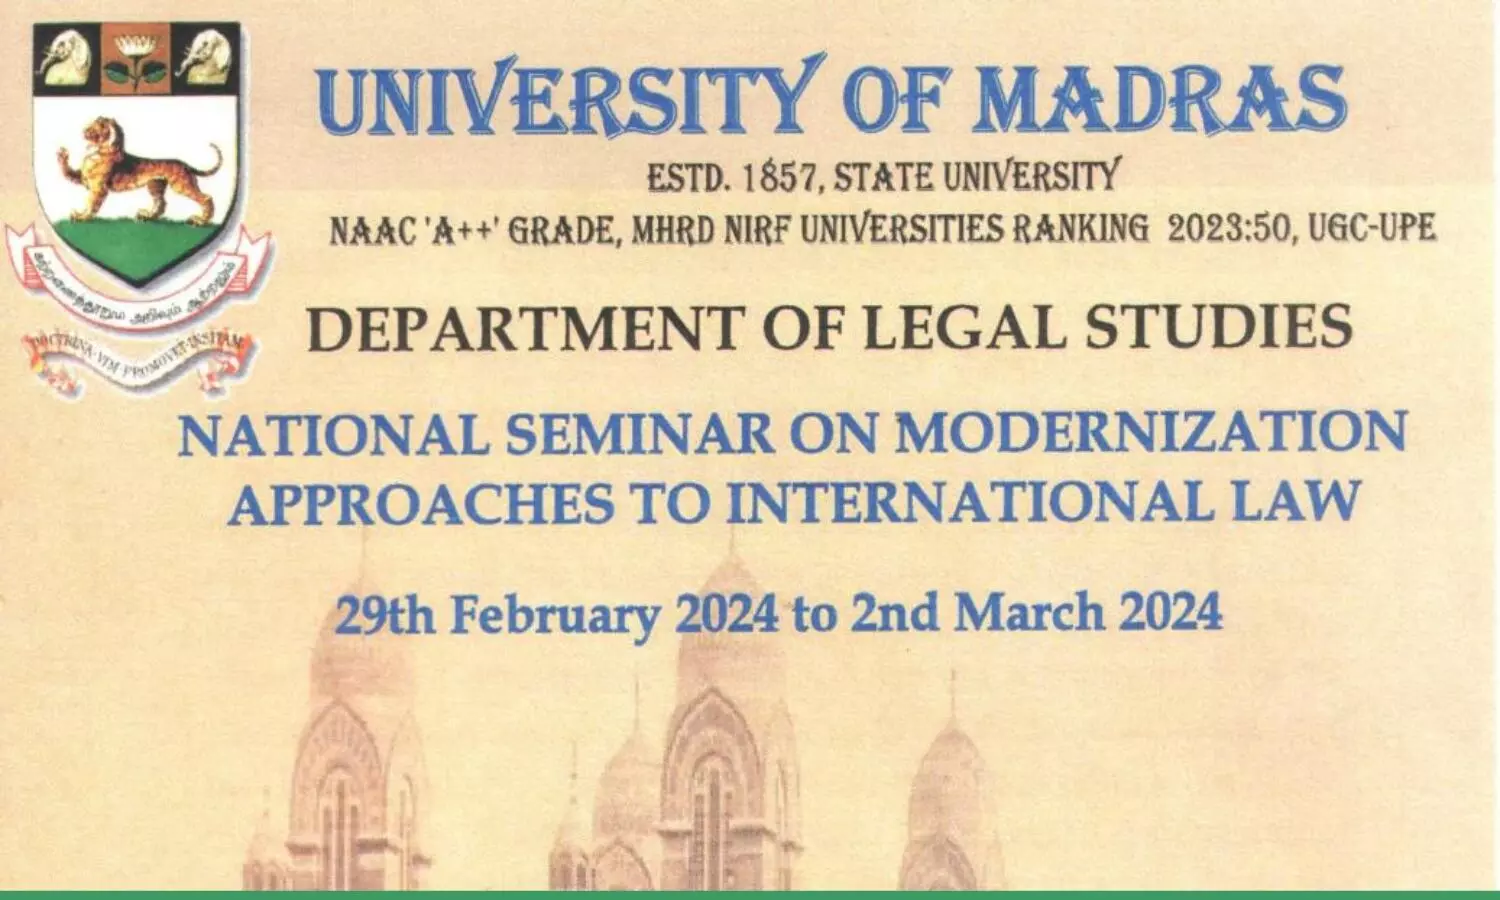 Call for Papers: Seminar on Modernization Approaches to International Law | University of Madras